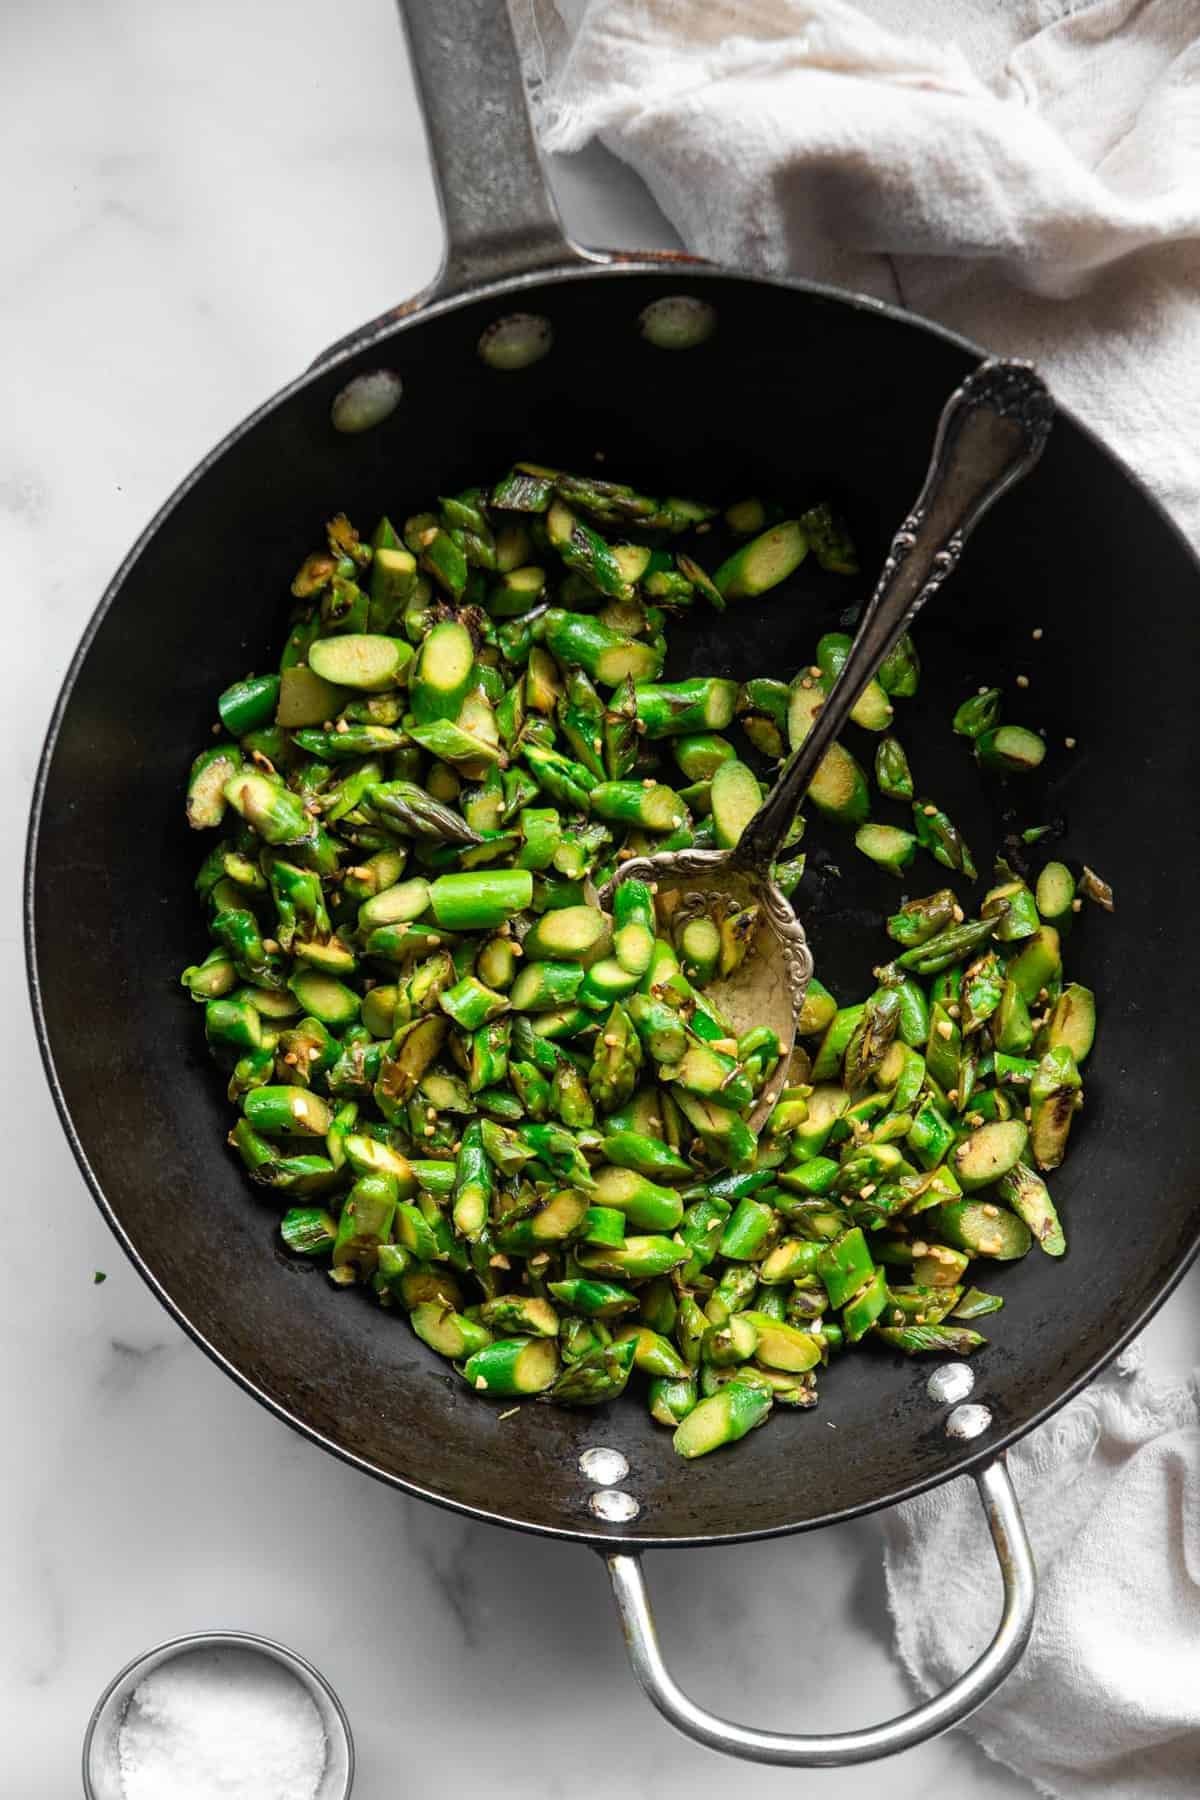 Stir fry asparagus being cooked in a pan